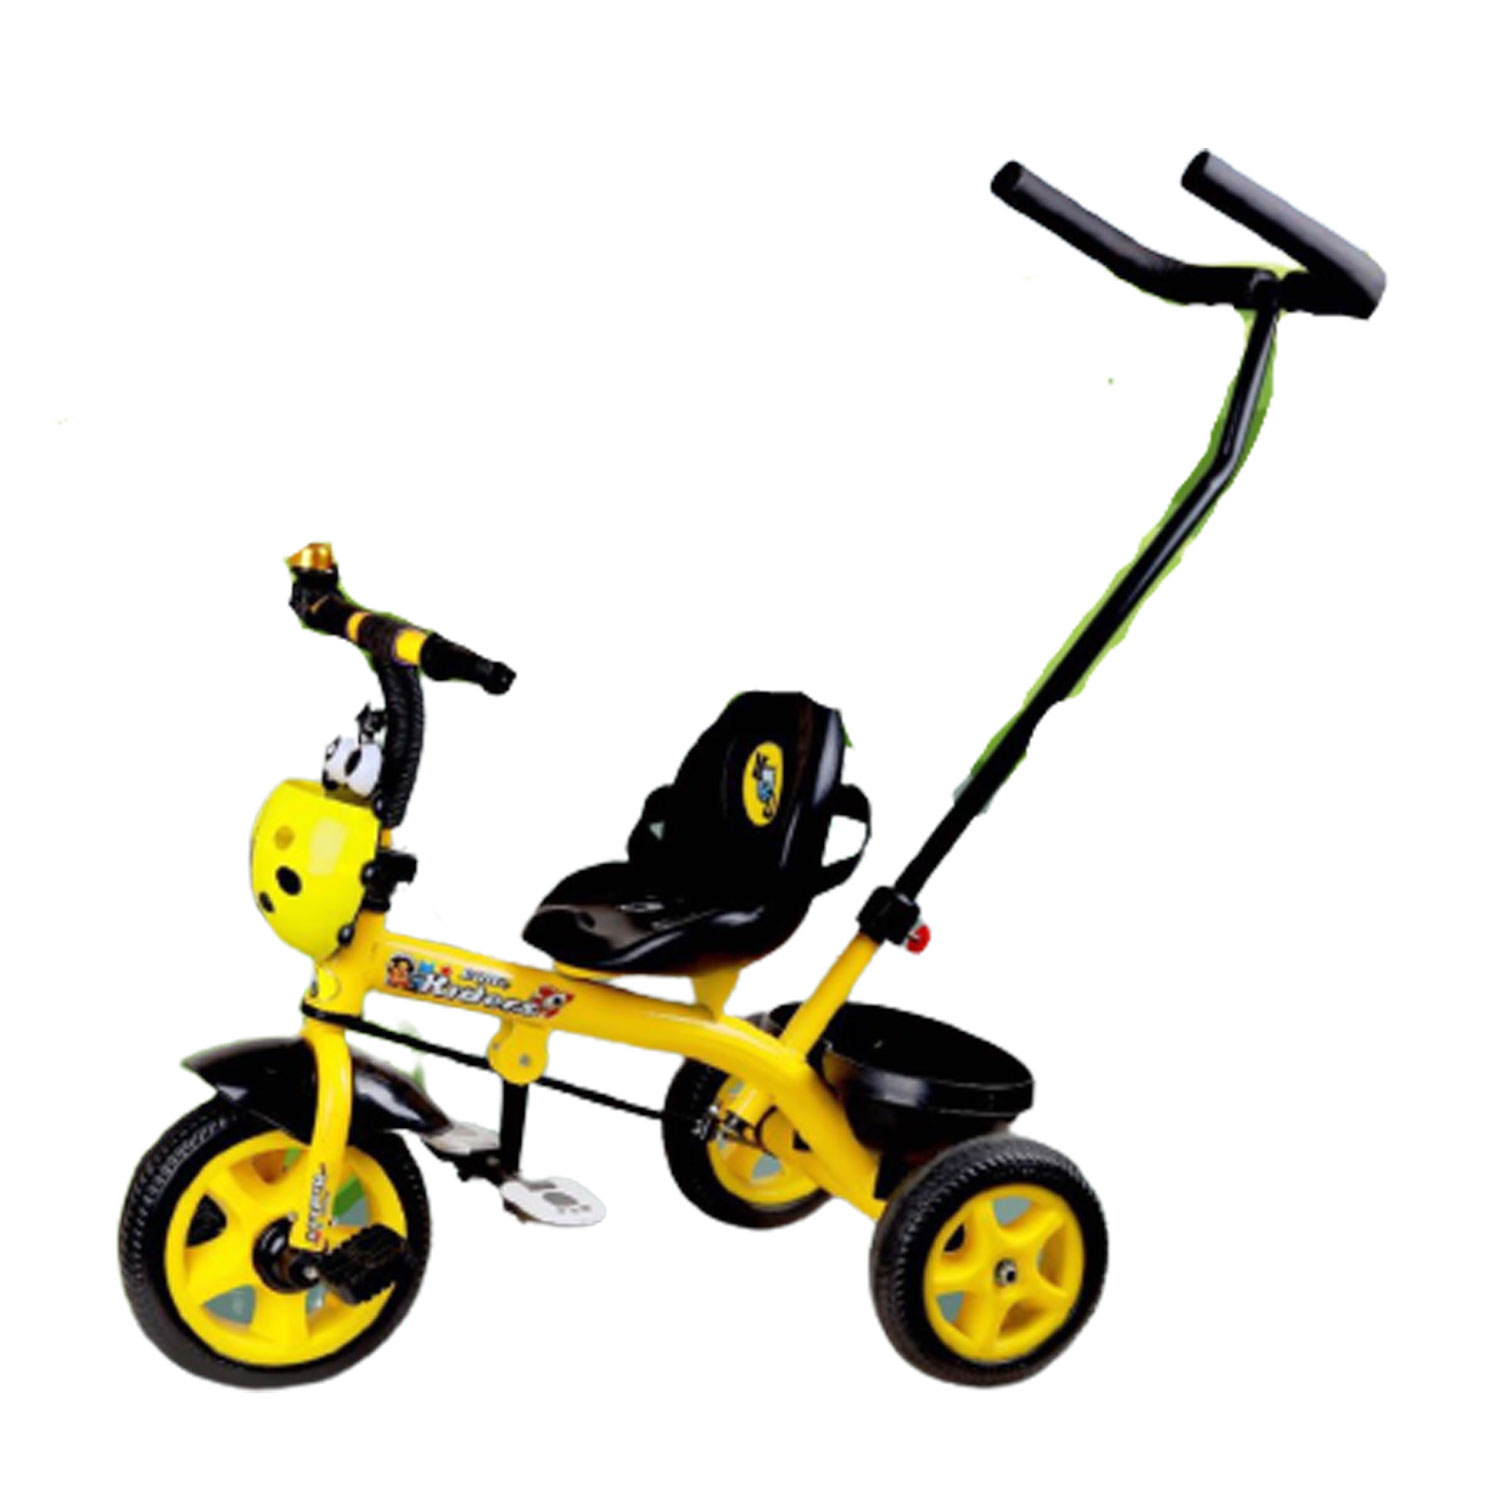 NAVRANGI BABY TRICYCLE FOR KIDS WITH FRONT OR BACK BASKET. TRICYCLE FOR KIDS  MD-114 